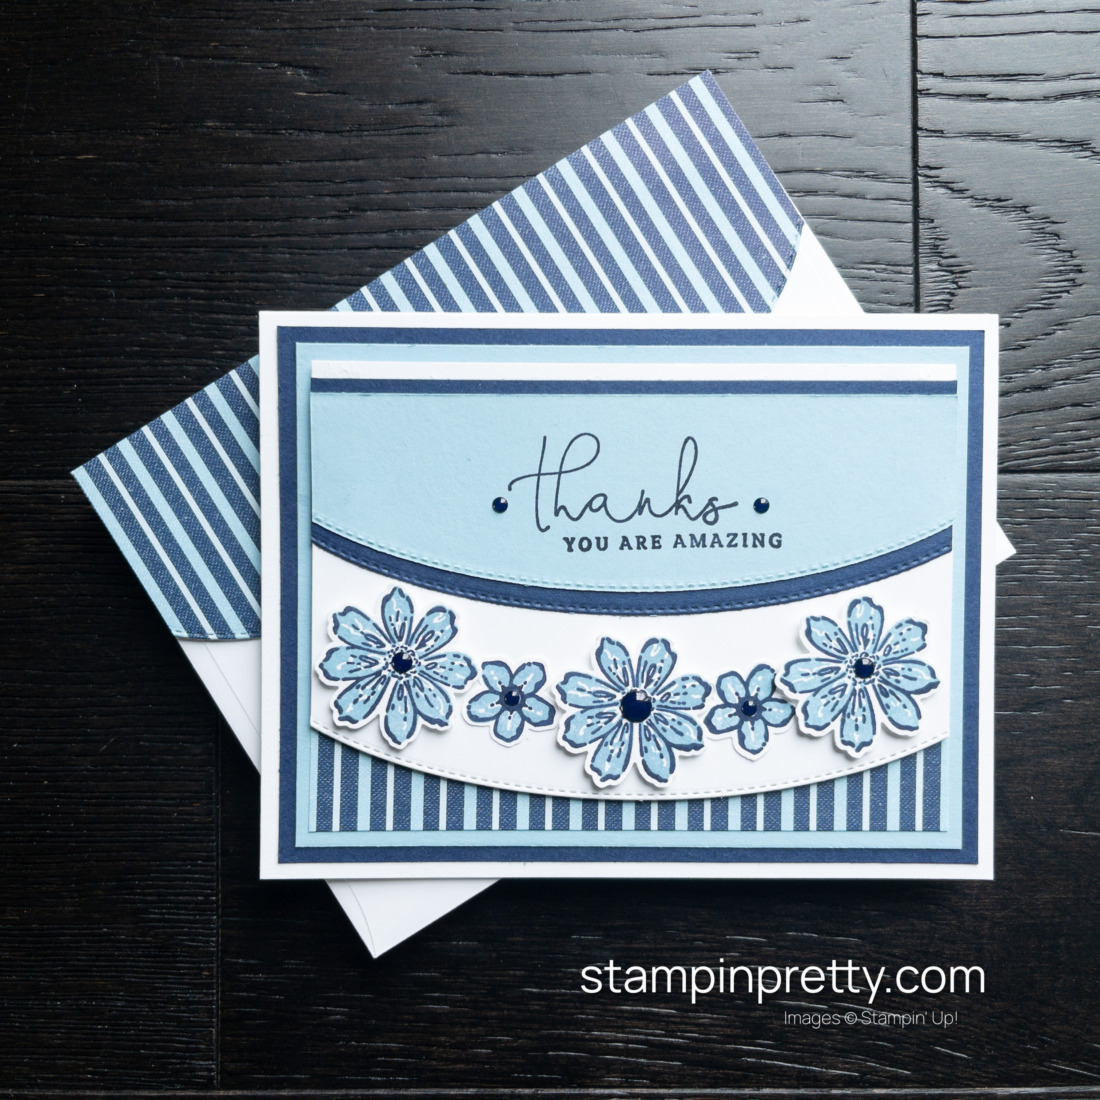 Create this Thank You Card using products from the Stampin' Up! Regency Park Suite Collection and Basic Borders Dies - Designed by Mary Fish, Stampin' Pretty